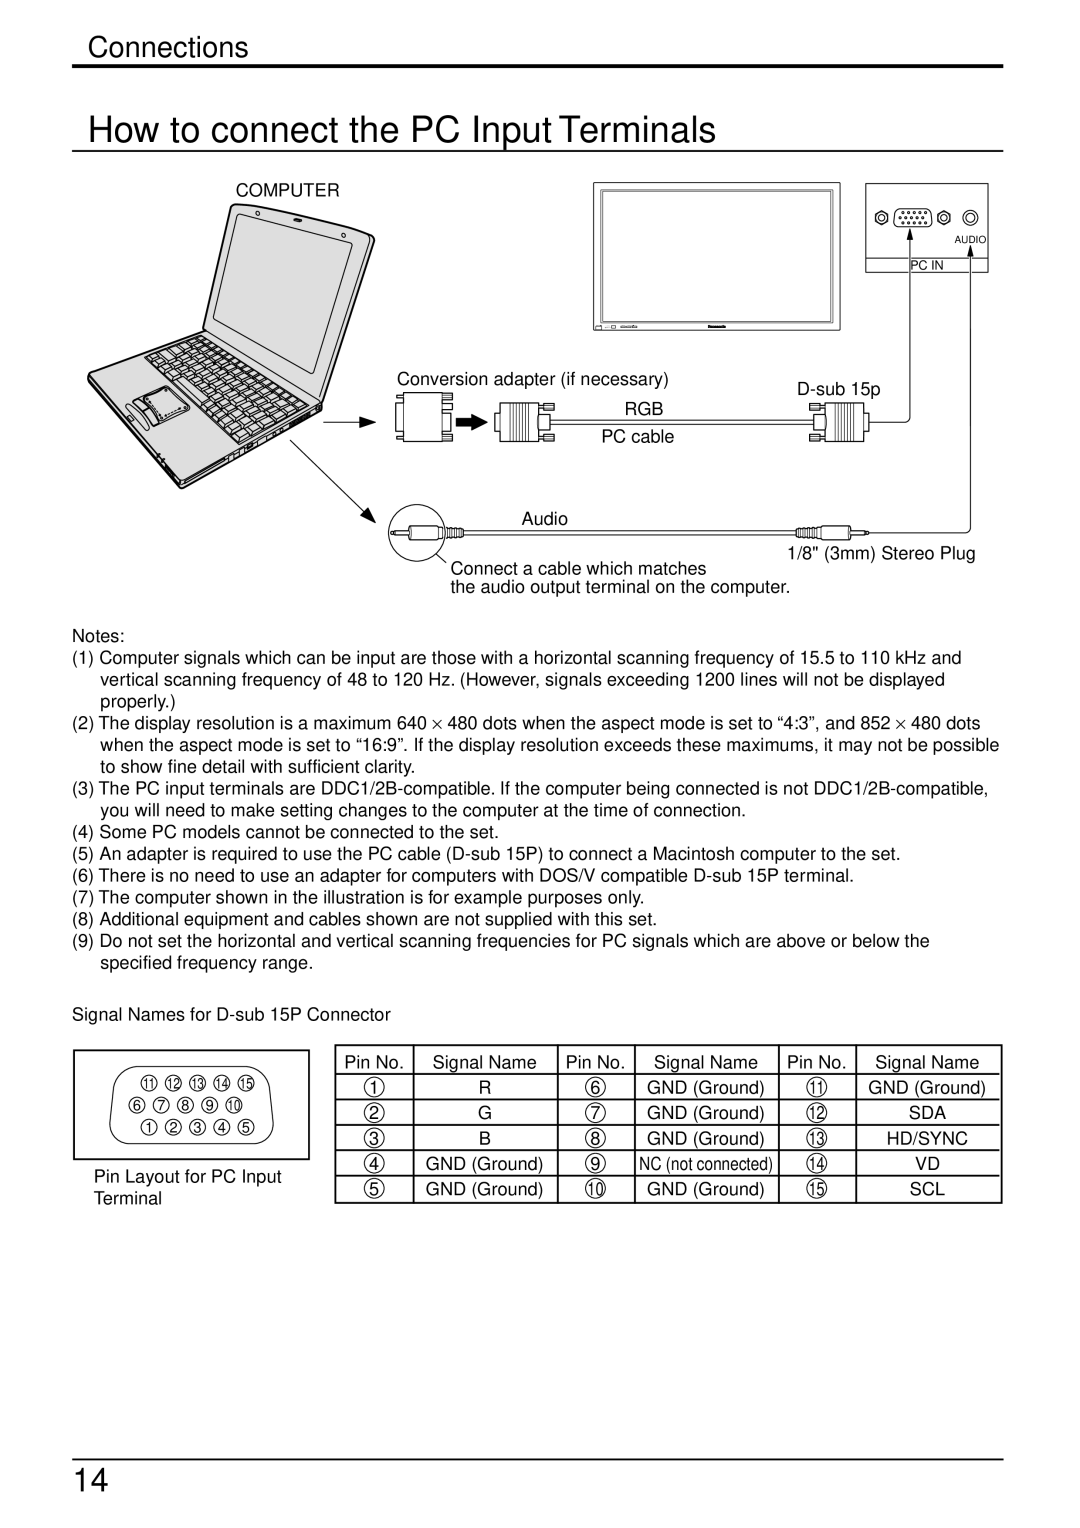 Panasonic TH-42PWD3, TH-42PW3 How to connect the PC Input Terminals, Computer, Rgb, Signal Names for D-sub 15P Connector 